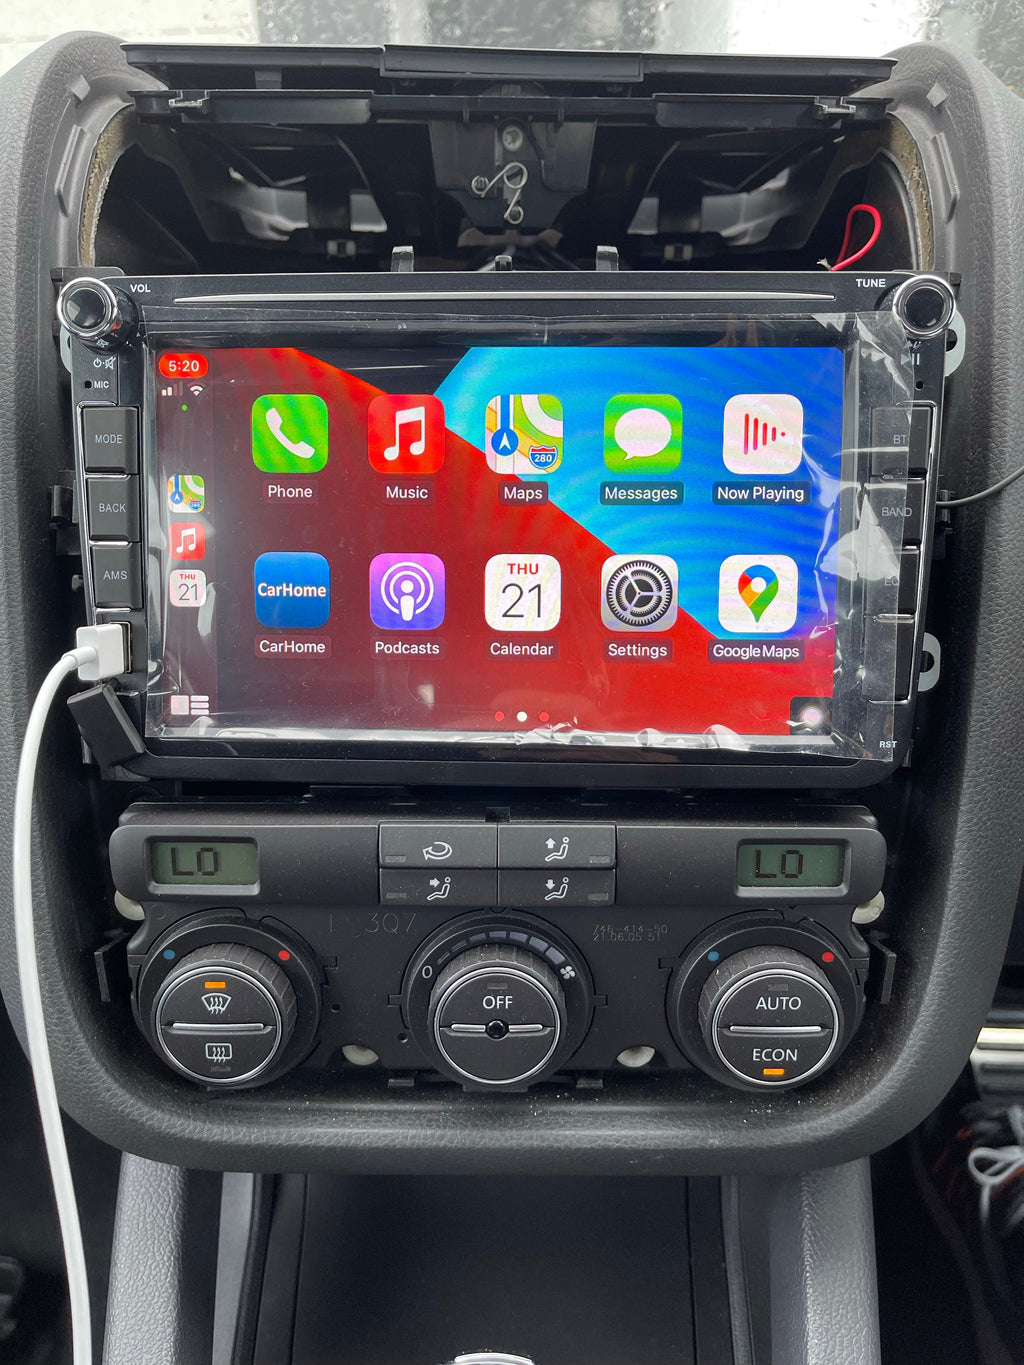 SPECIAL** Car Stereo Suit VW Golf MK5 MK6 with Apple CarPlay